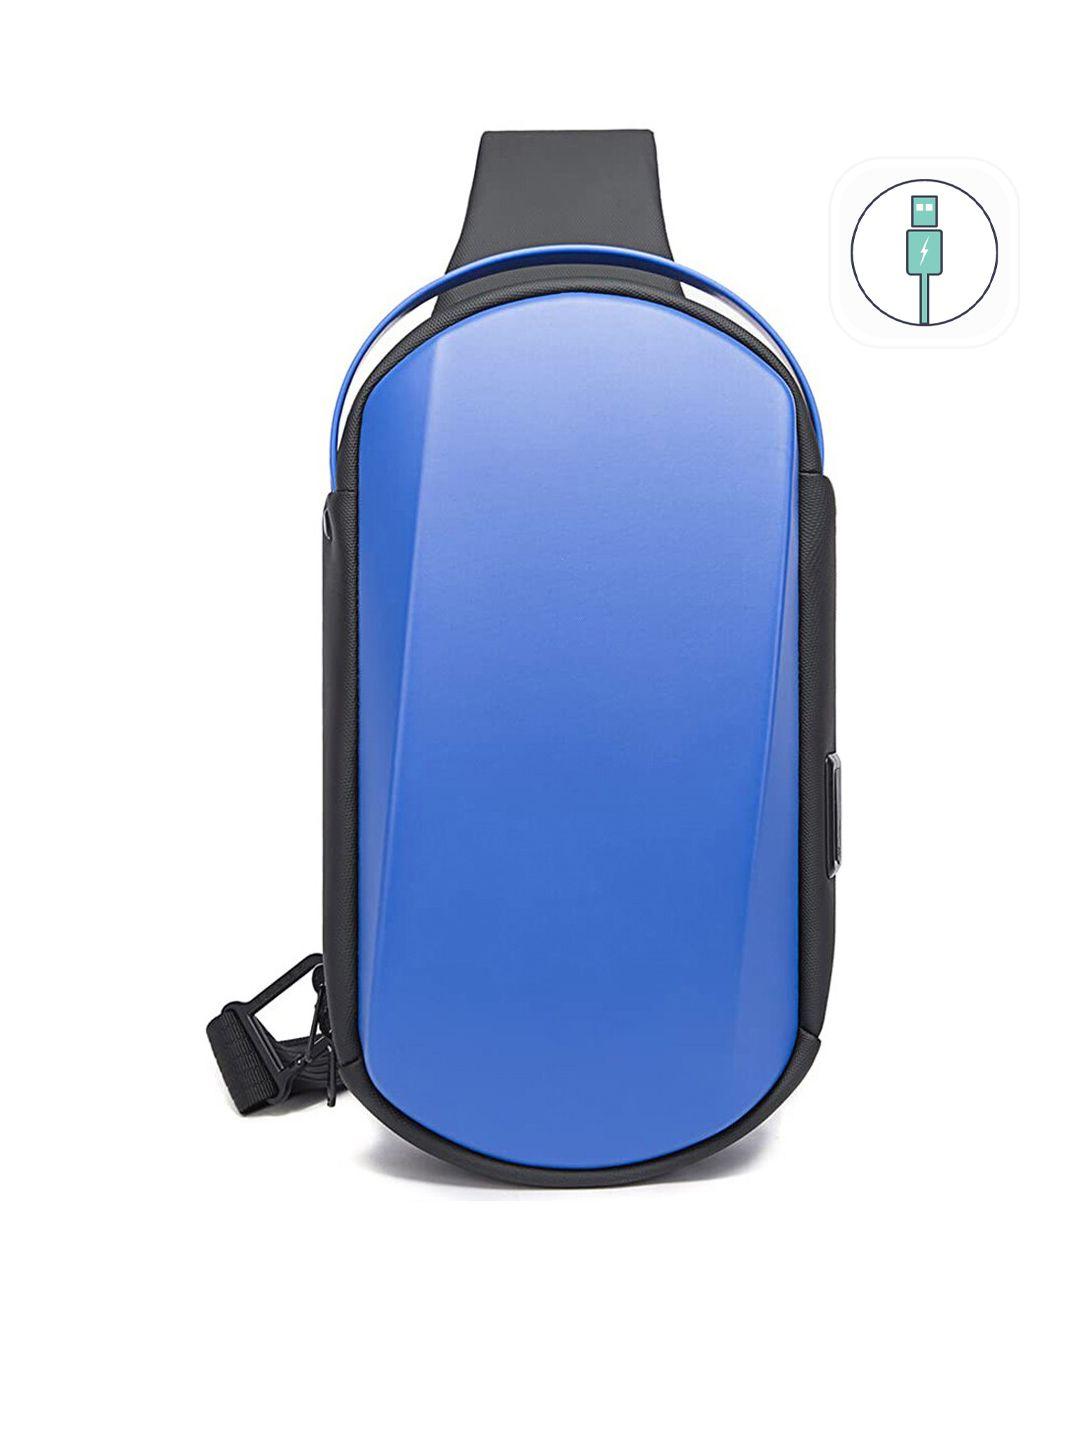 the clownfish unisex blue & black backpack with usb charging port